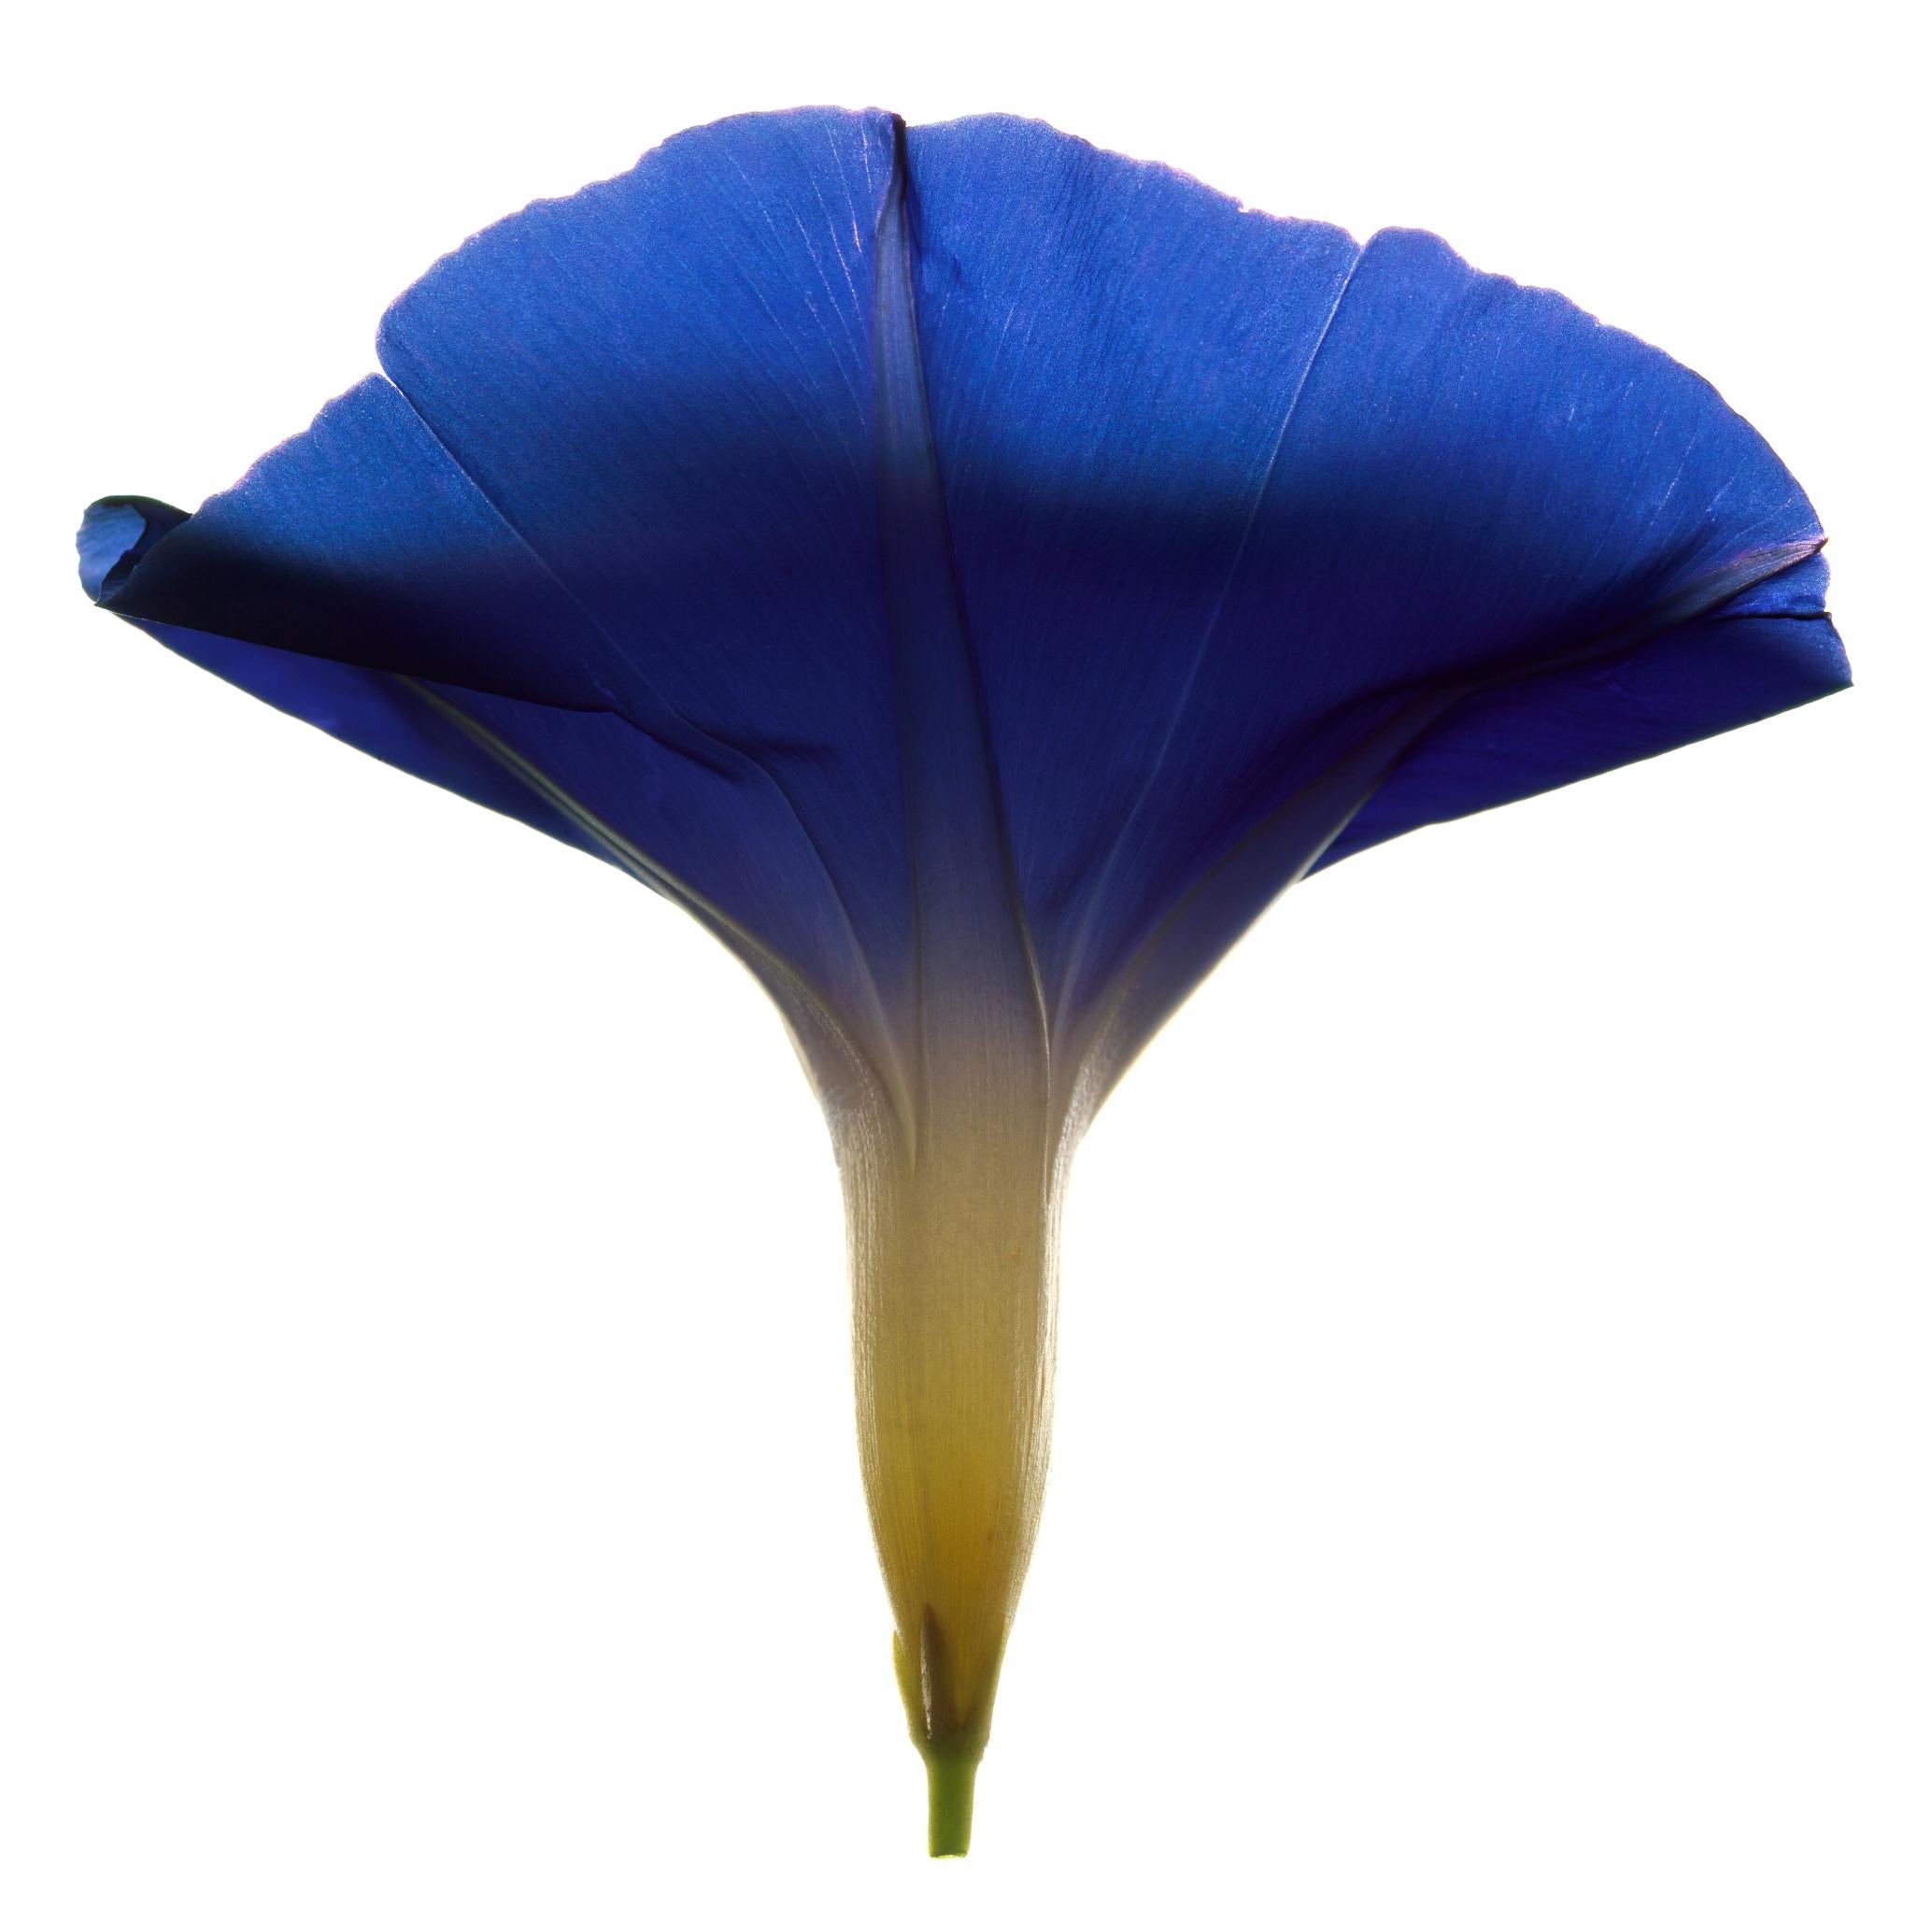 Chad Kleitsch Color Photograph - No. 58 (Framed Still Life Photograph of an Indigo Blue Flower on White) 